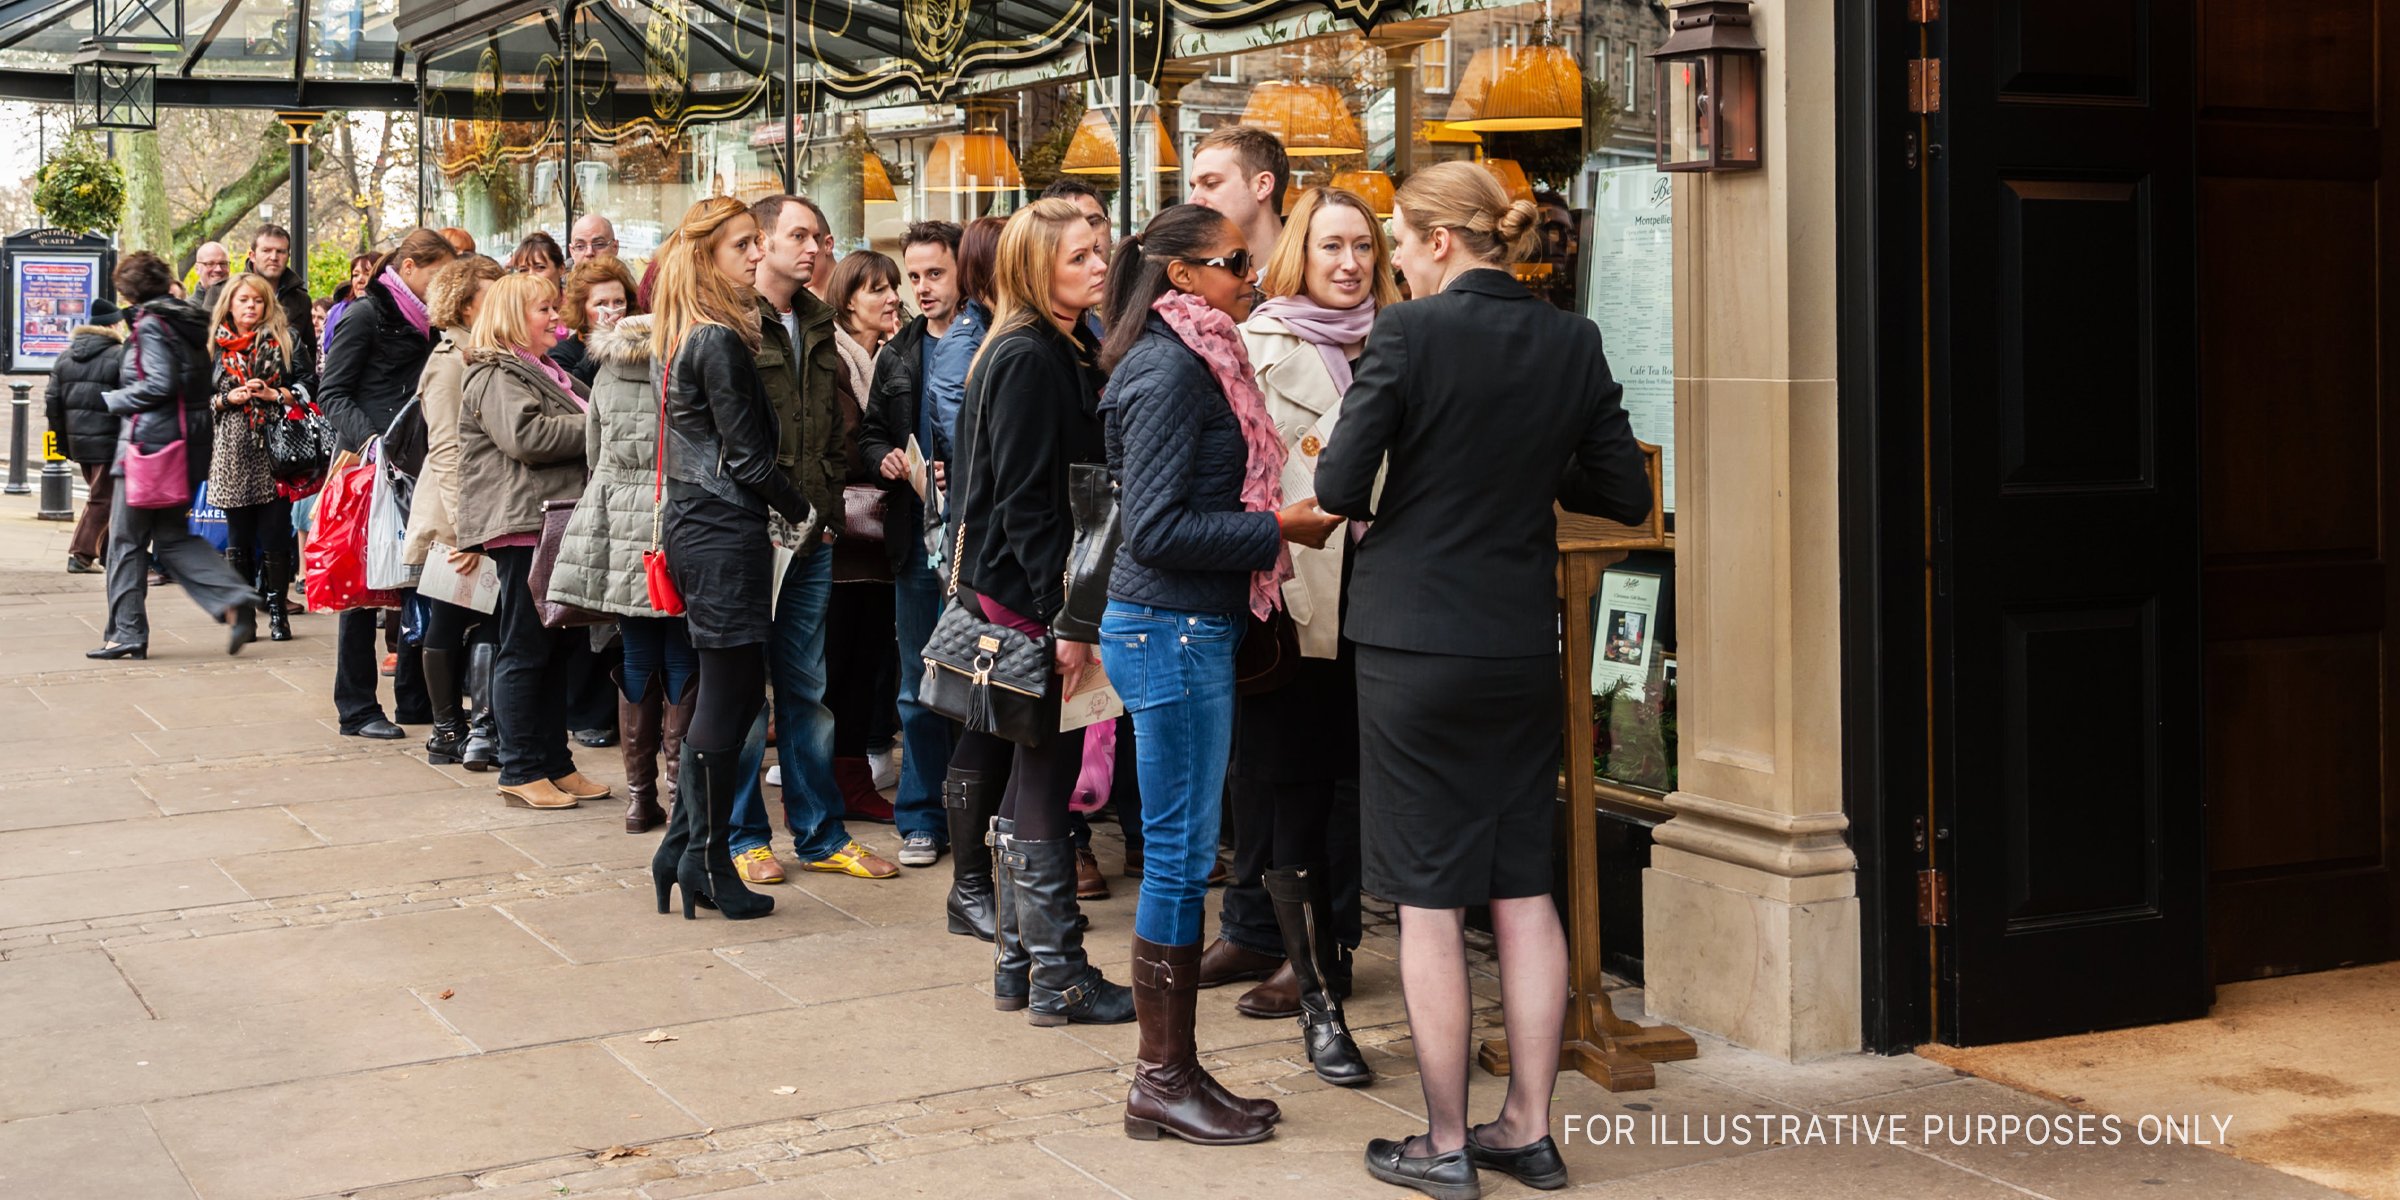 Customers lined up outside an eatery. | Source: Shutterstock